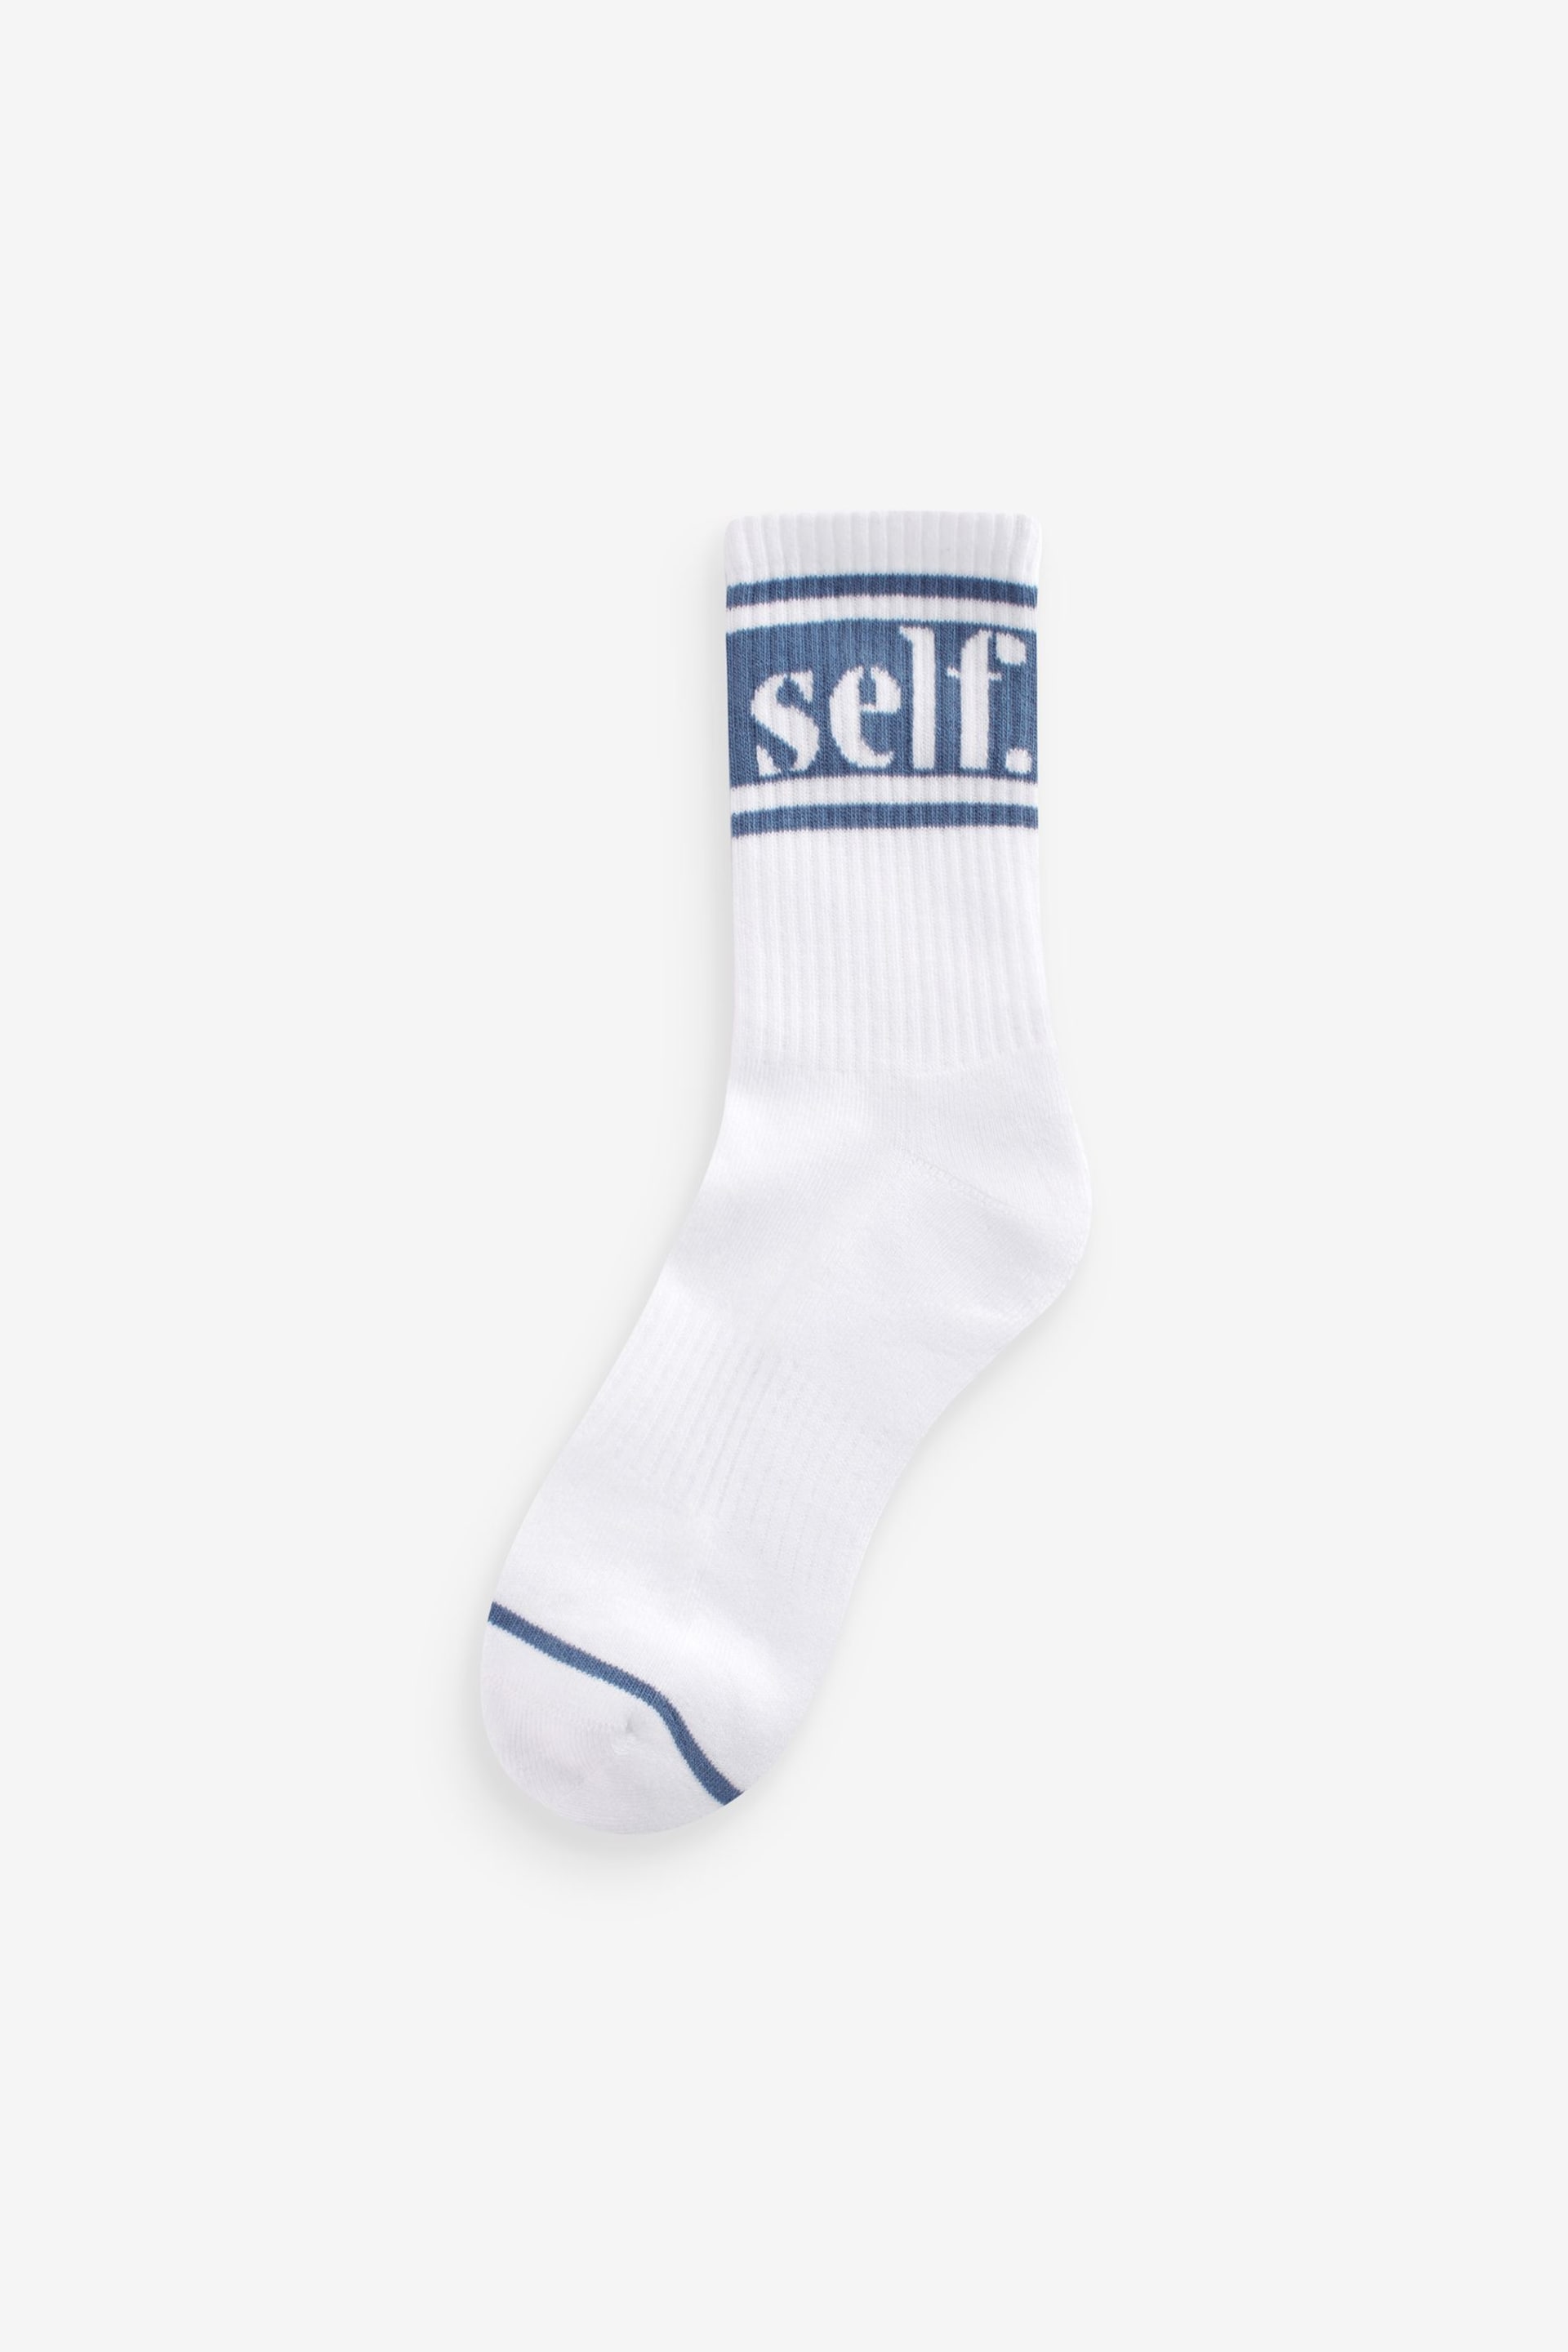 self. Pink/Navy/ Teal Cushioned Sole Ribbed Slogan Ankle Socks 3 Pack - Image 2 of 5